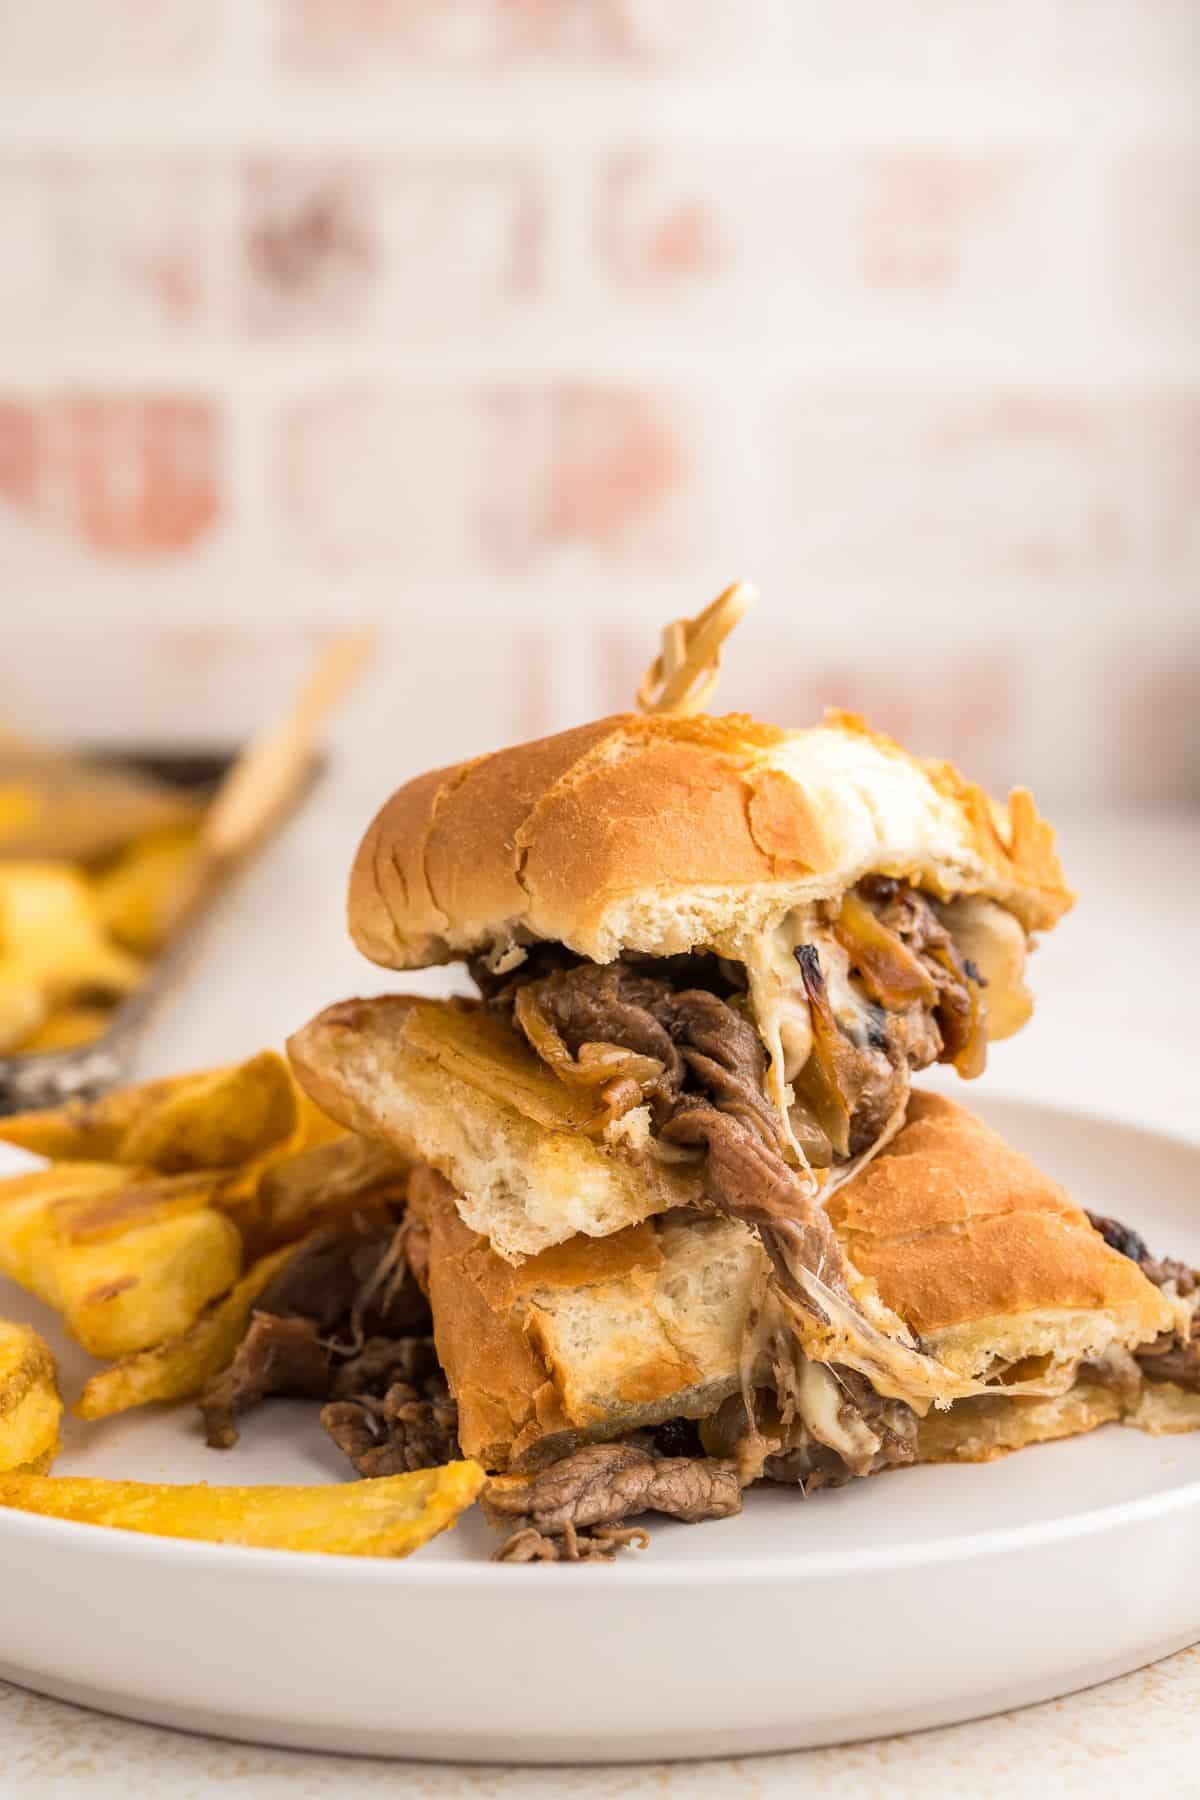 Philly steak sandwich cut in half with melty cheese and gooey tender philly cheesesteak.